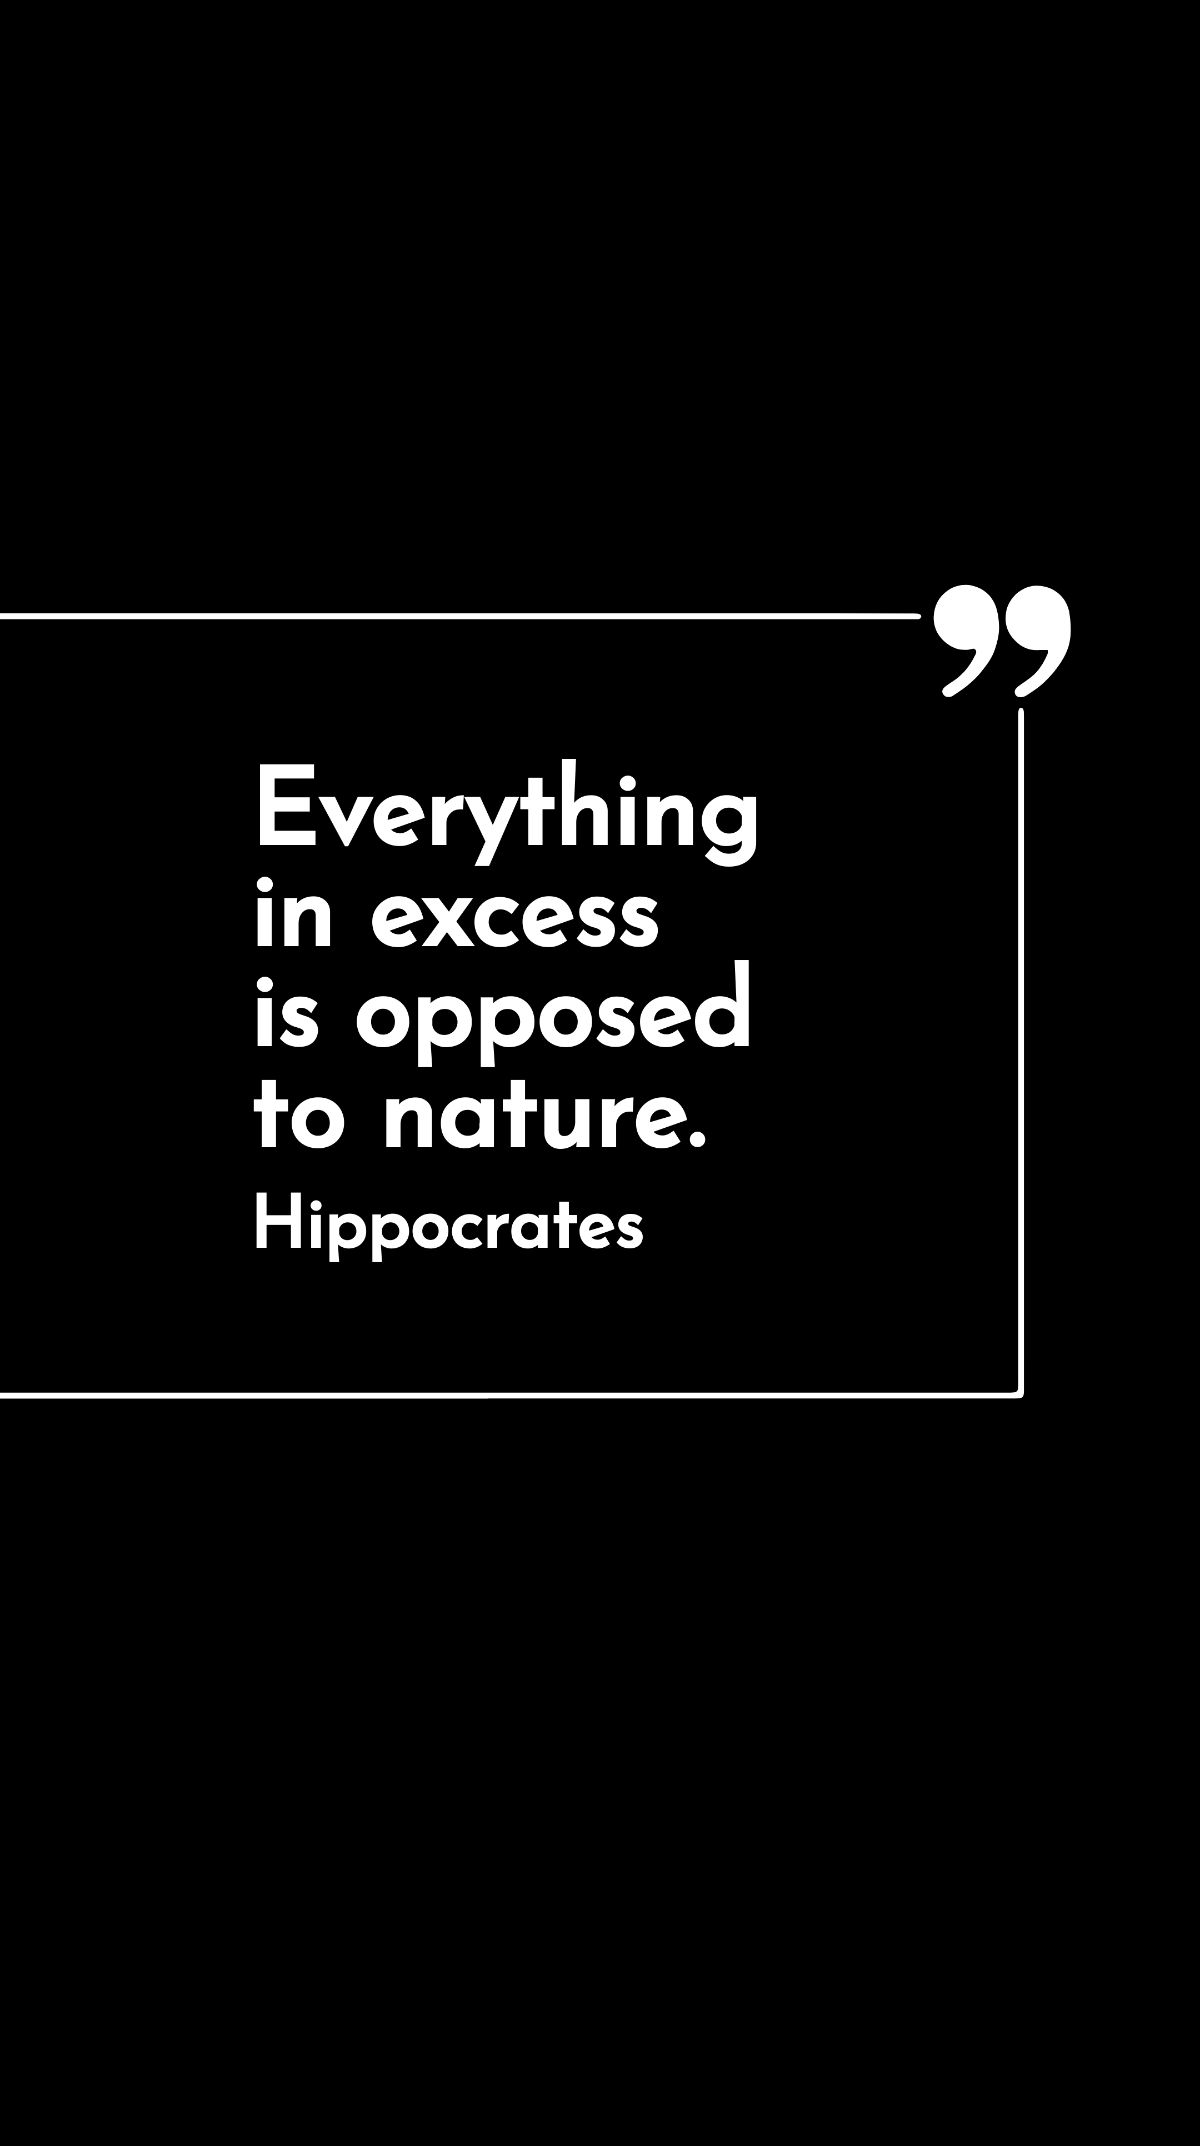 Free Hippocrates - Everything in excess is opposed to nature. Template